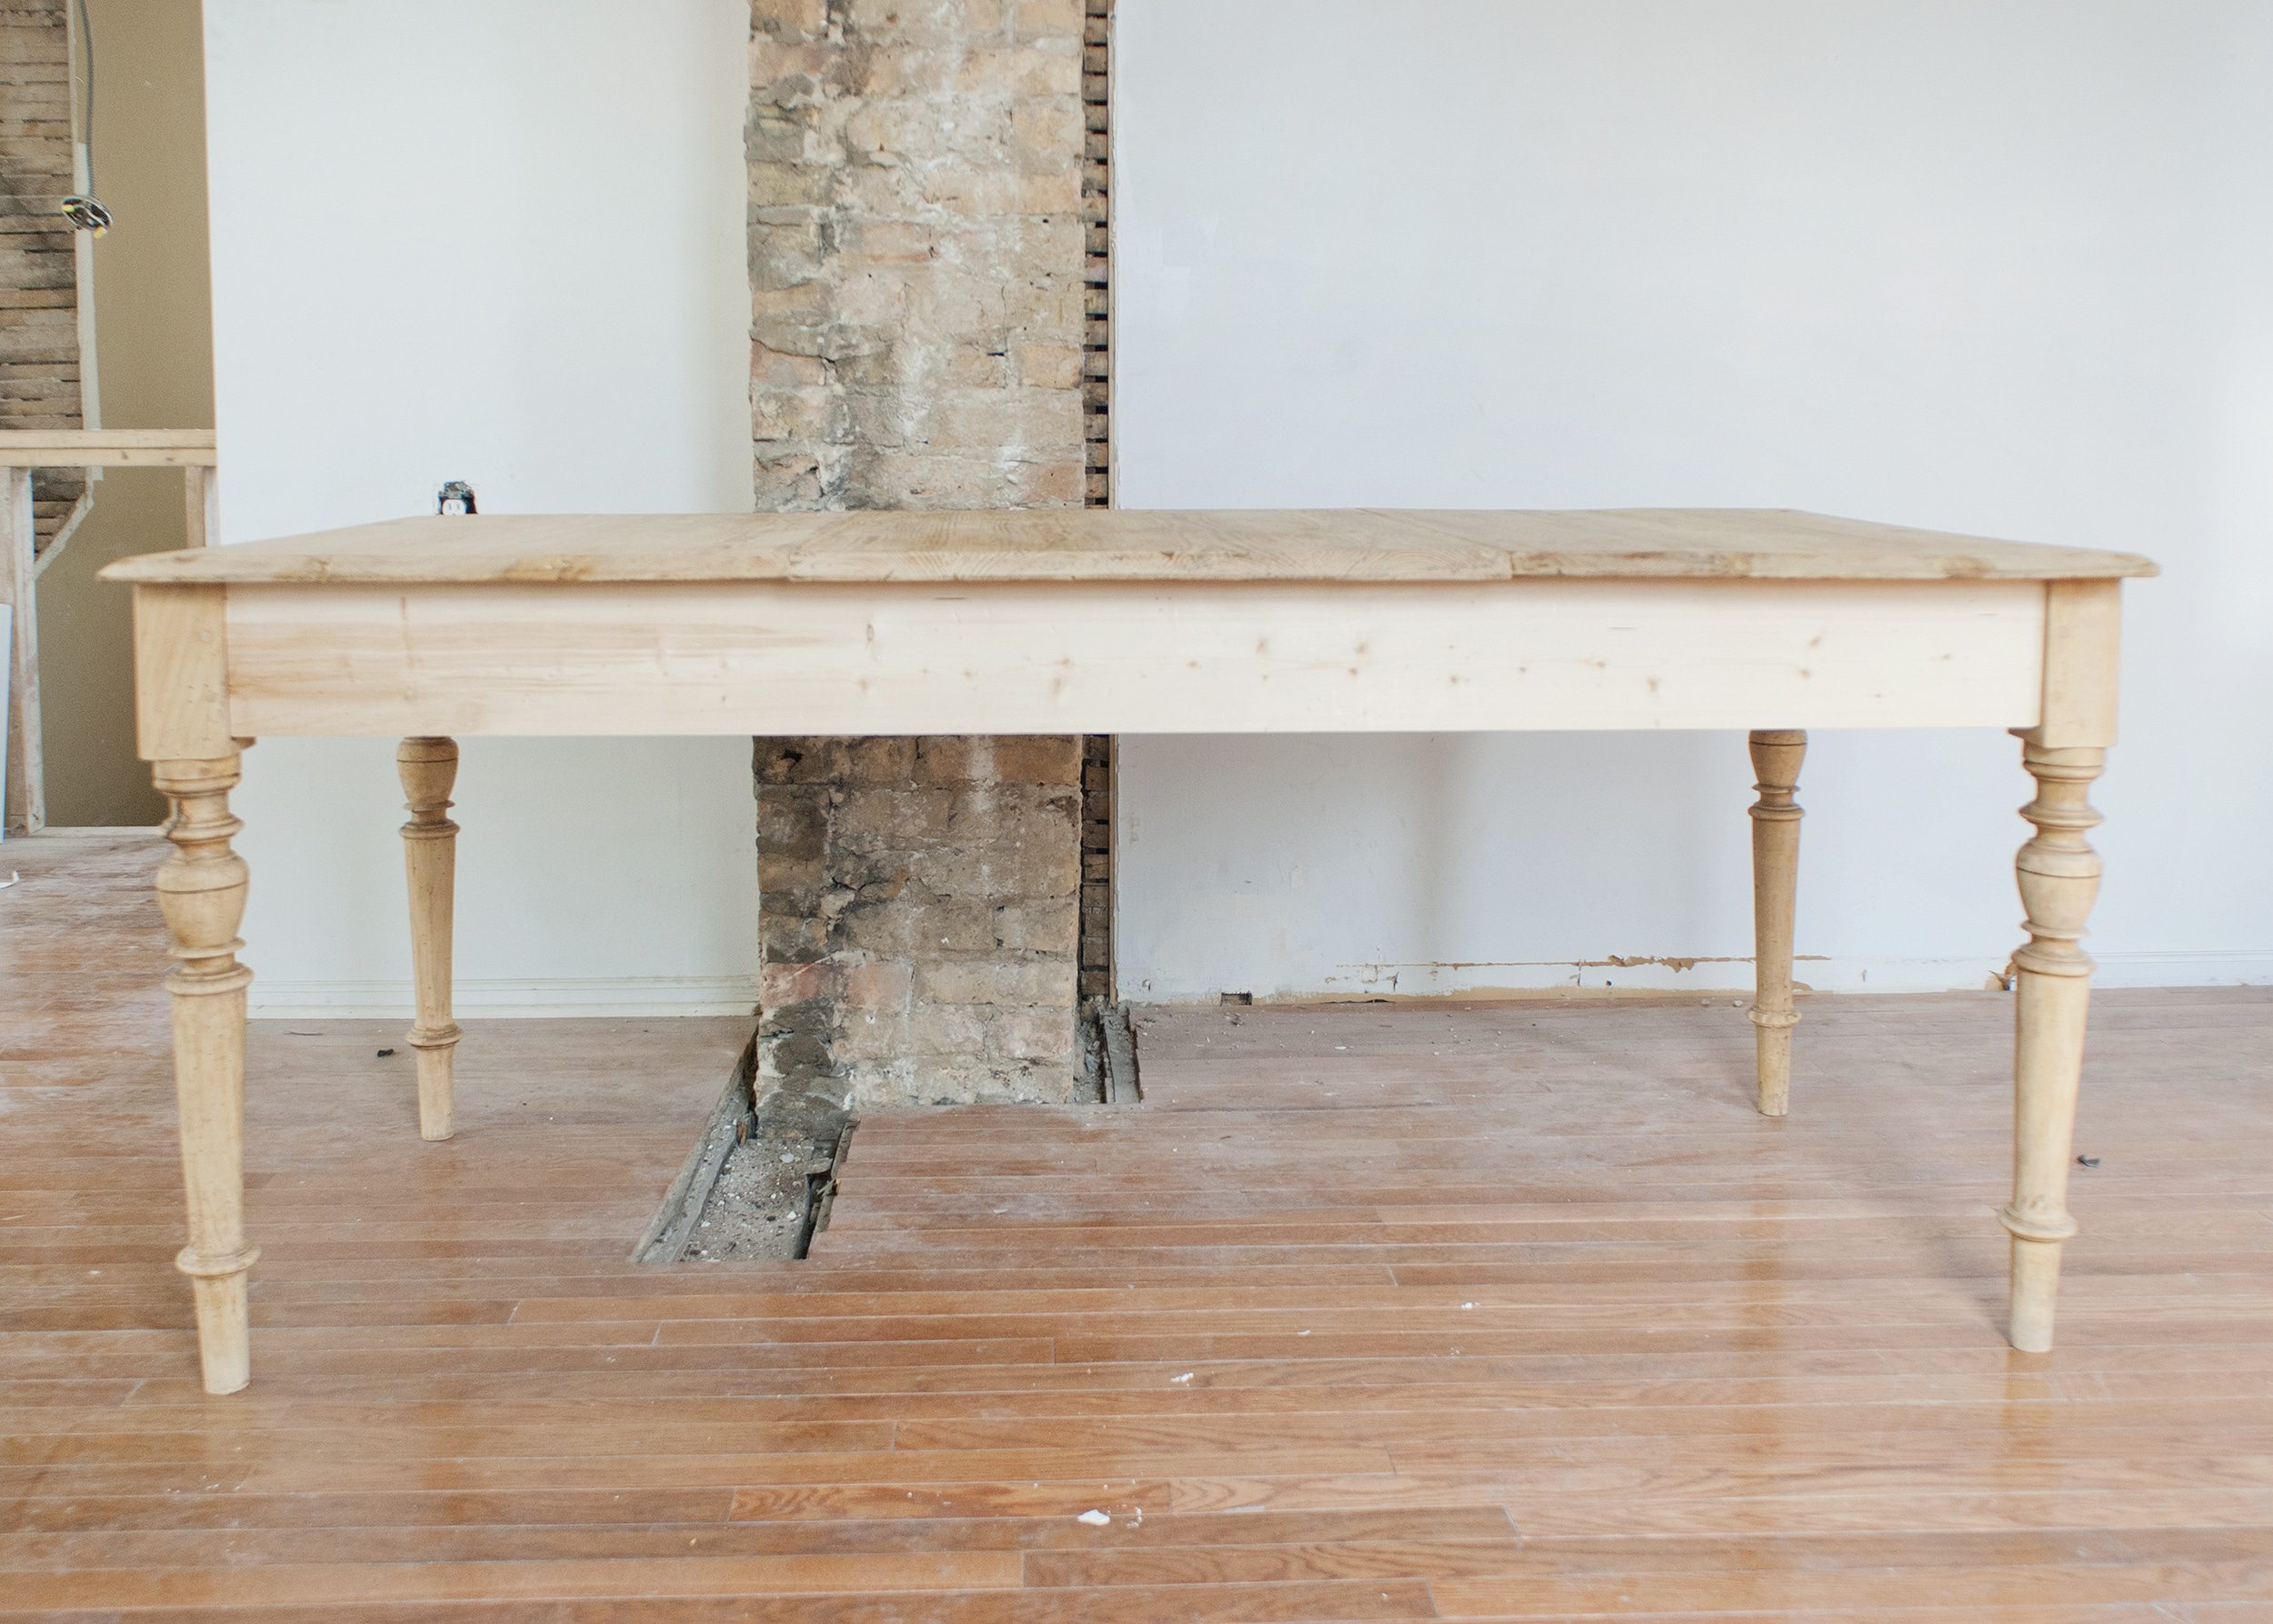 The vintage farmhouse, sanded down and ready for staining // via Yellow Brick Home